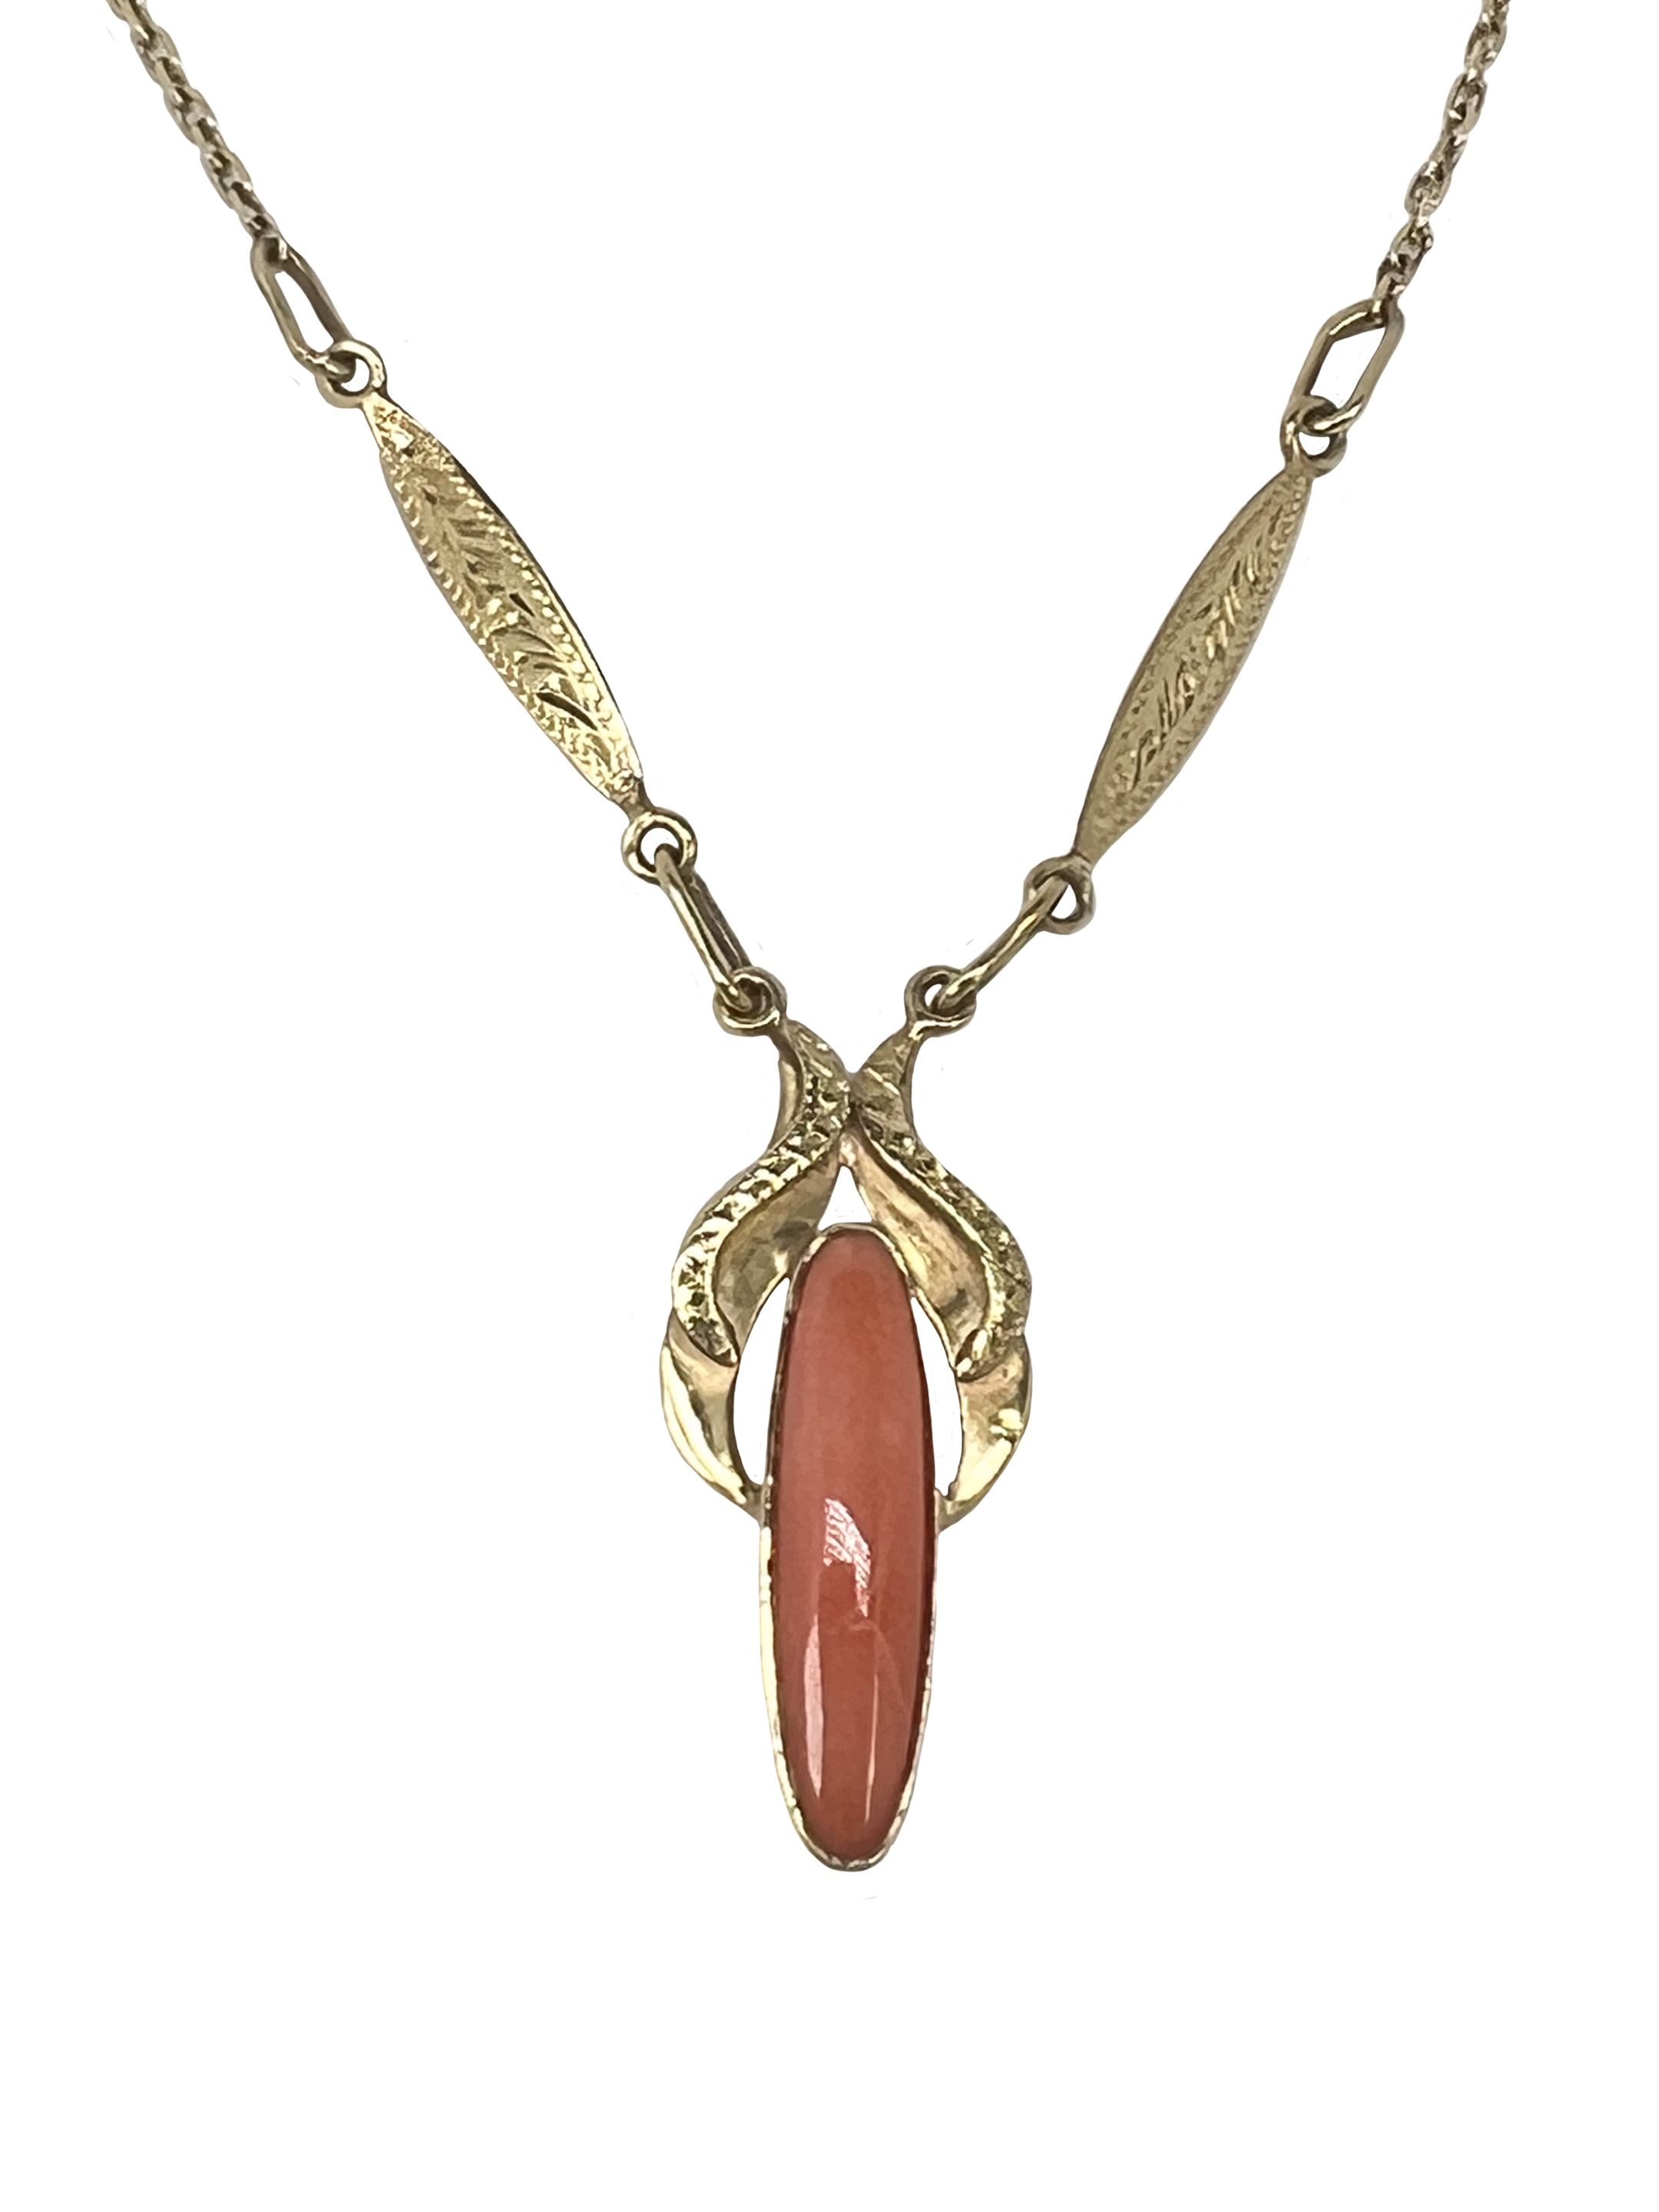 Gold necklace with an orange sun stone